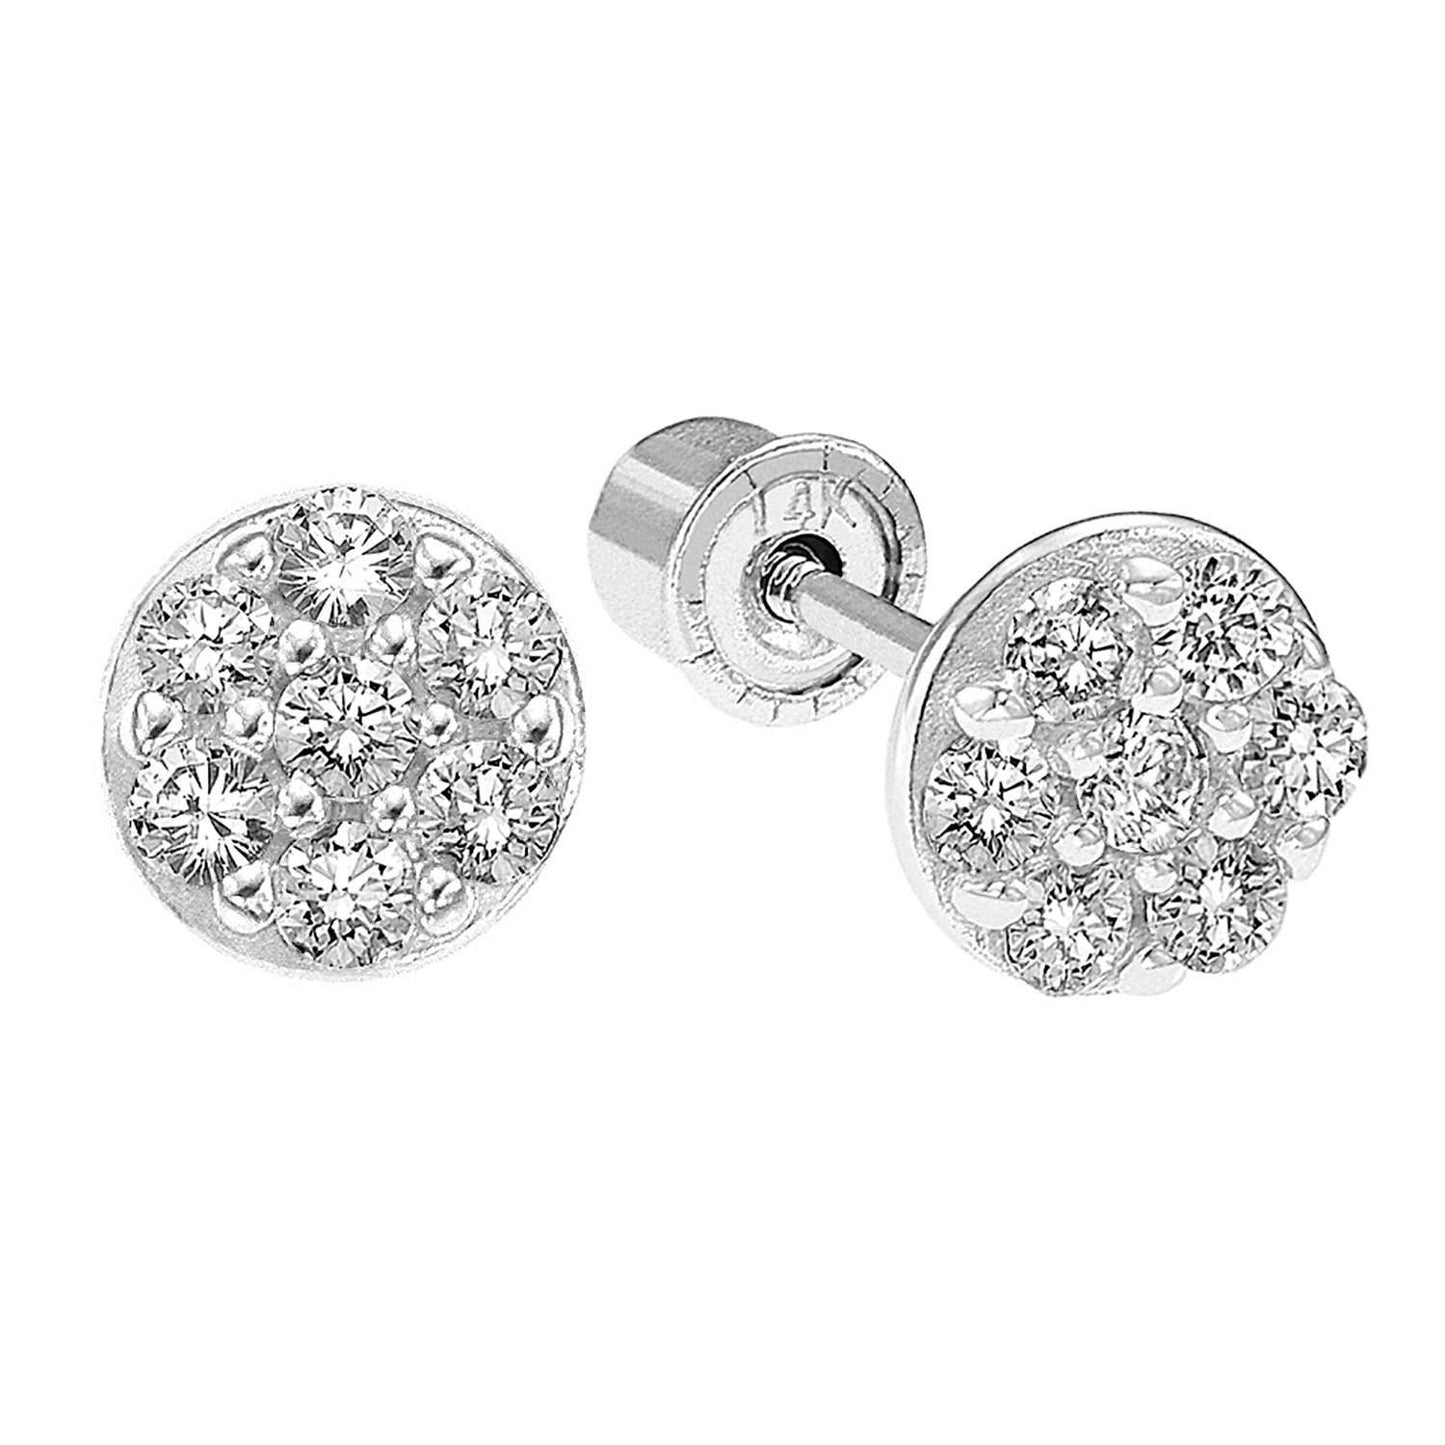 14k Gold Round Stud Earrings with Screw Backings